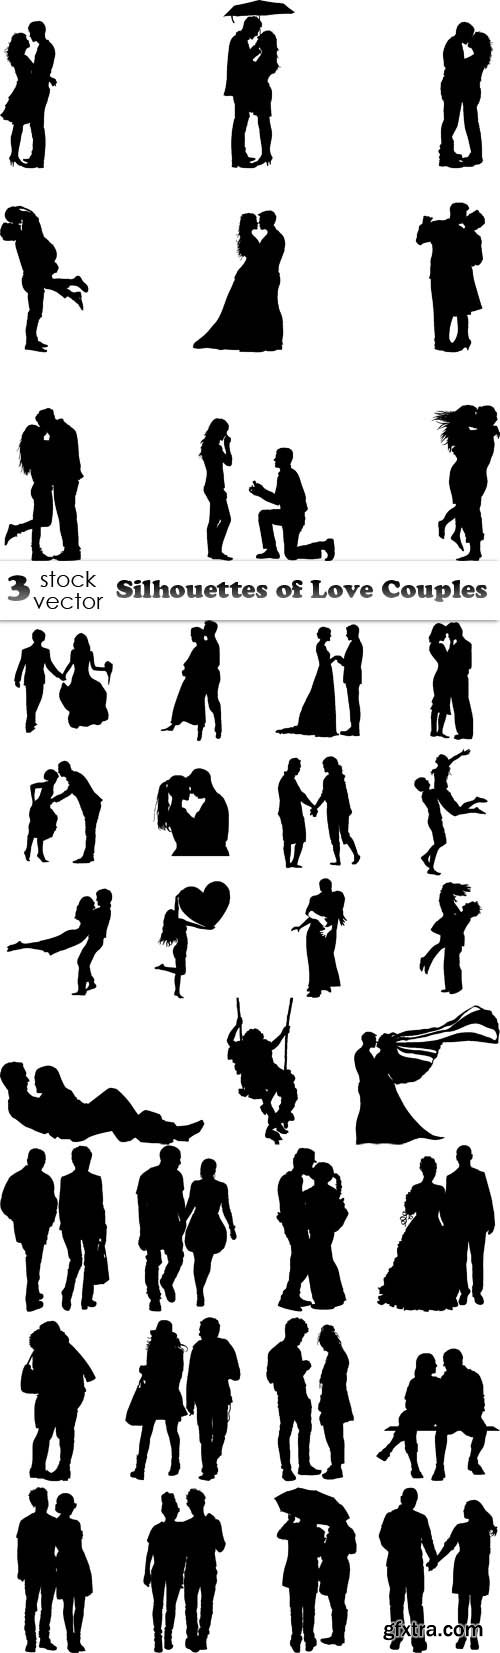 Vectors - Silhouettes of Love Couples